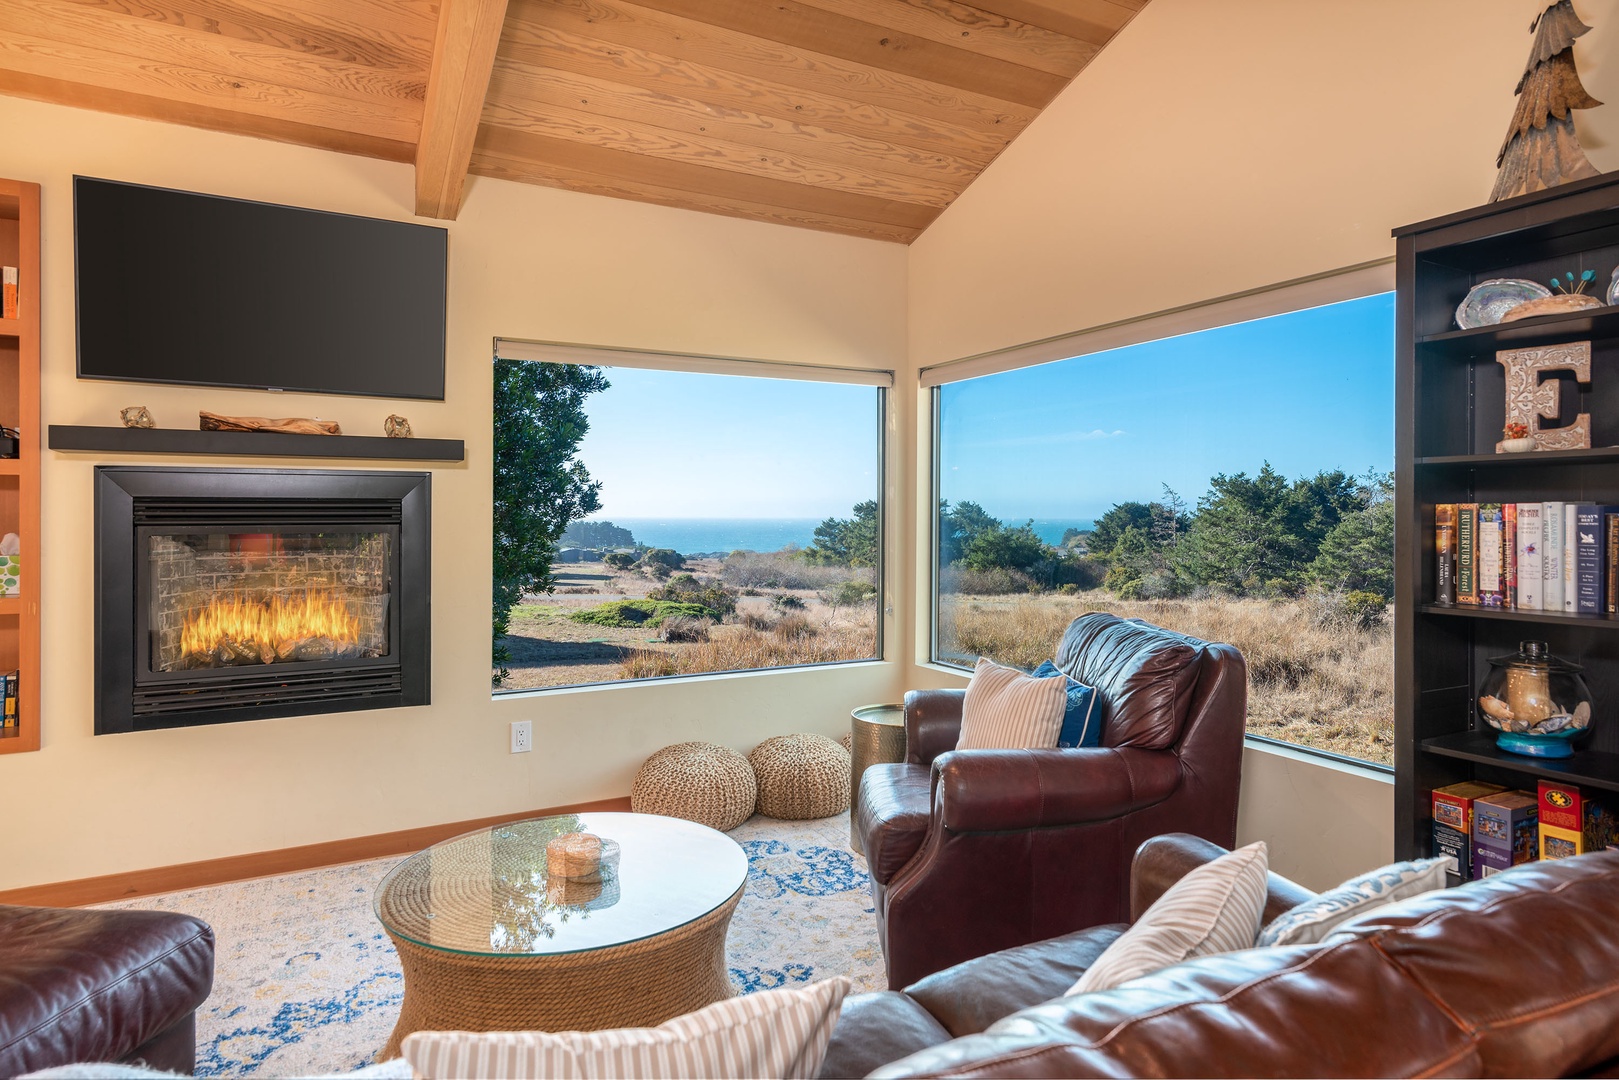 Ocean view living room with fireplace and flat screen TV